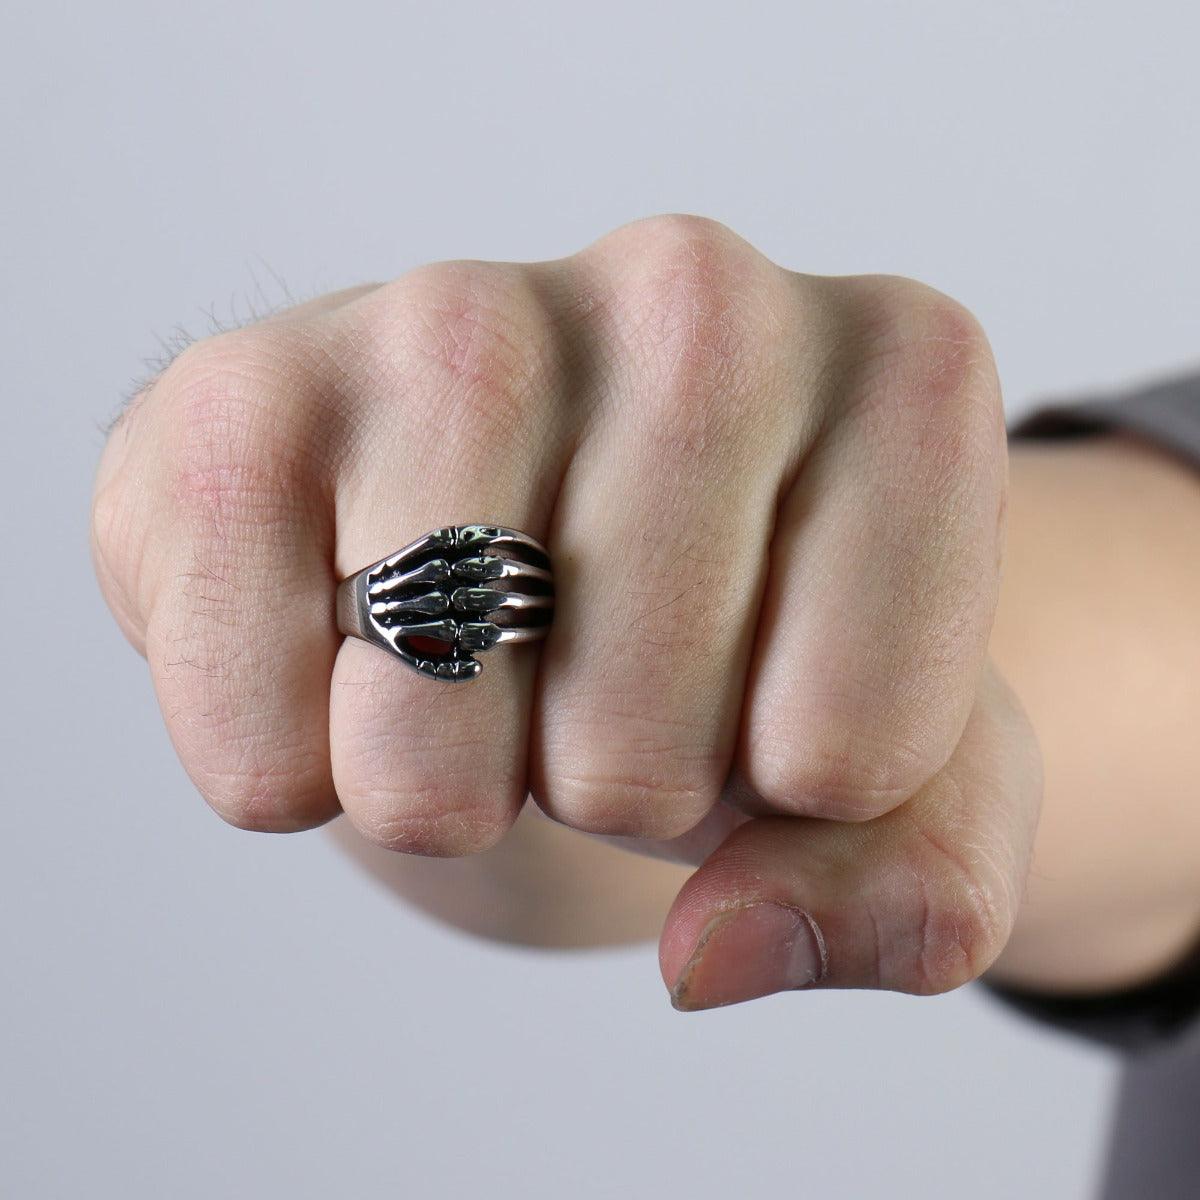 Hot Leathers Skeleton Hand Ring - American Legend Rider